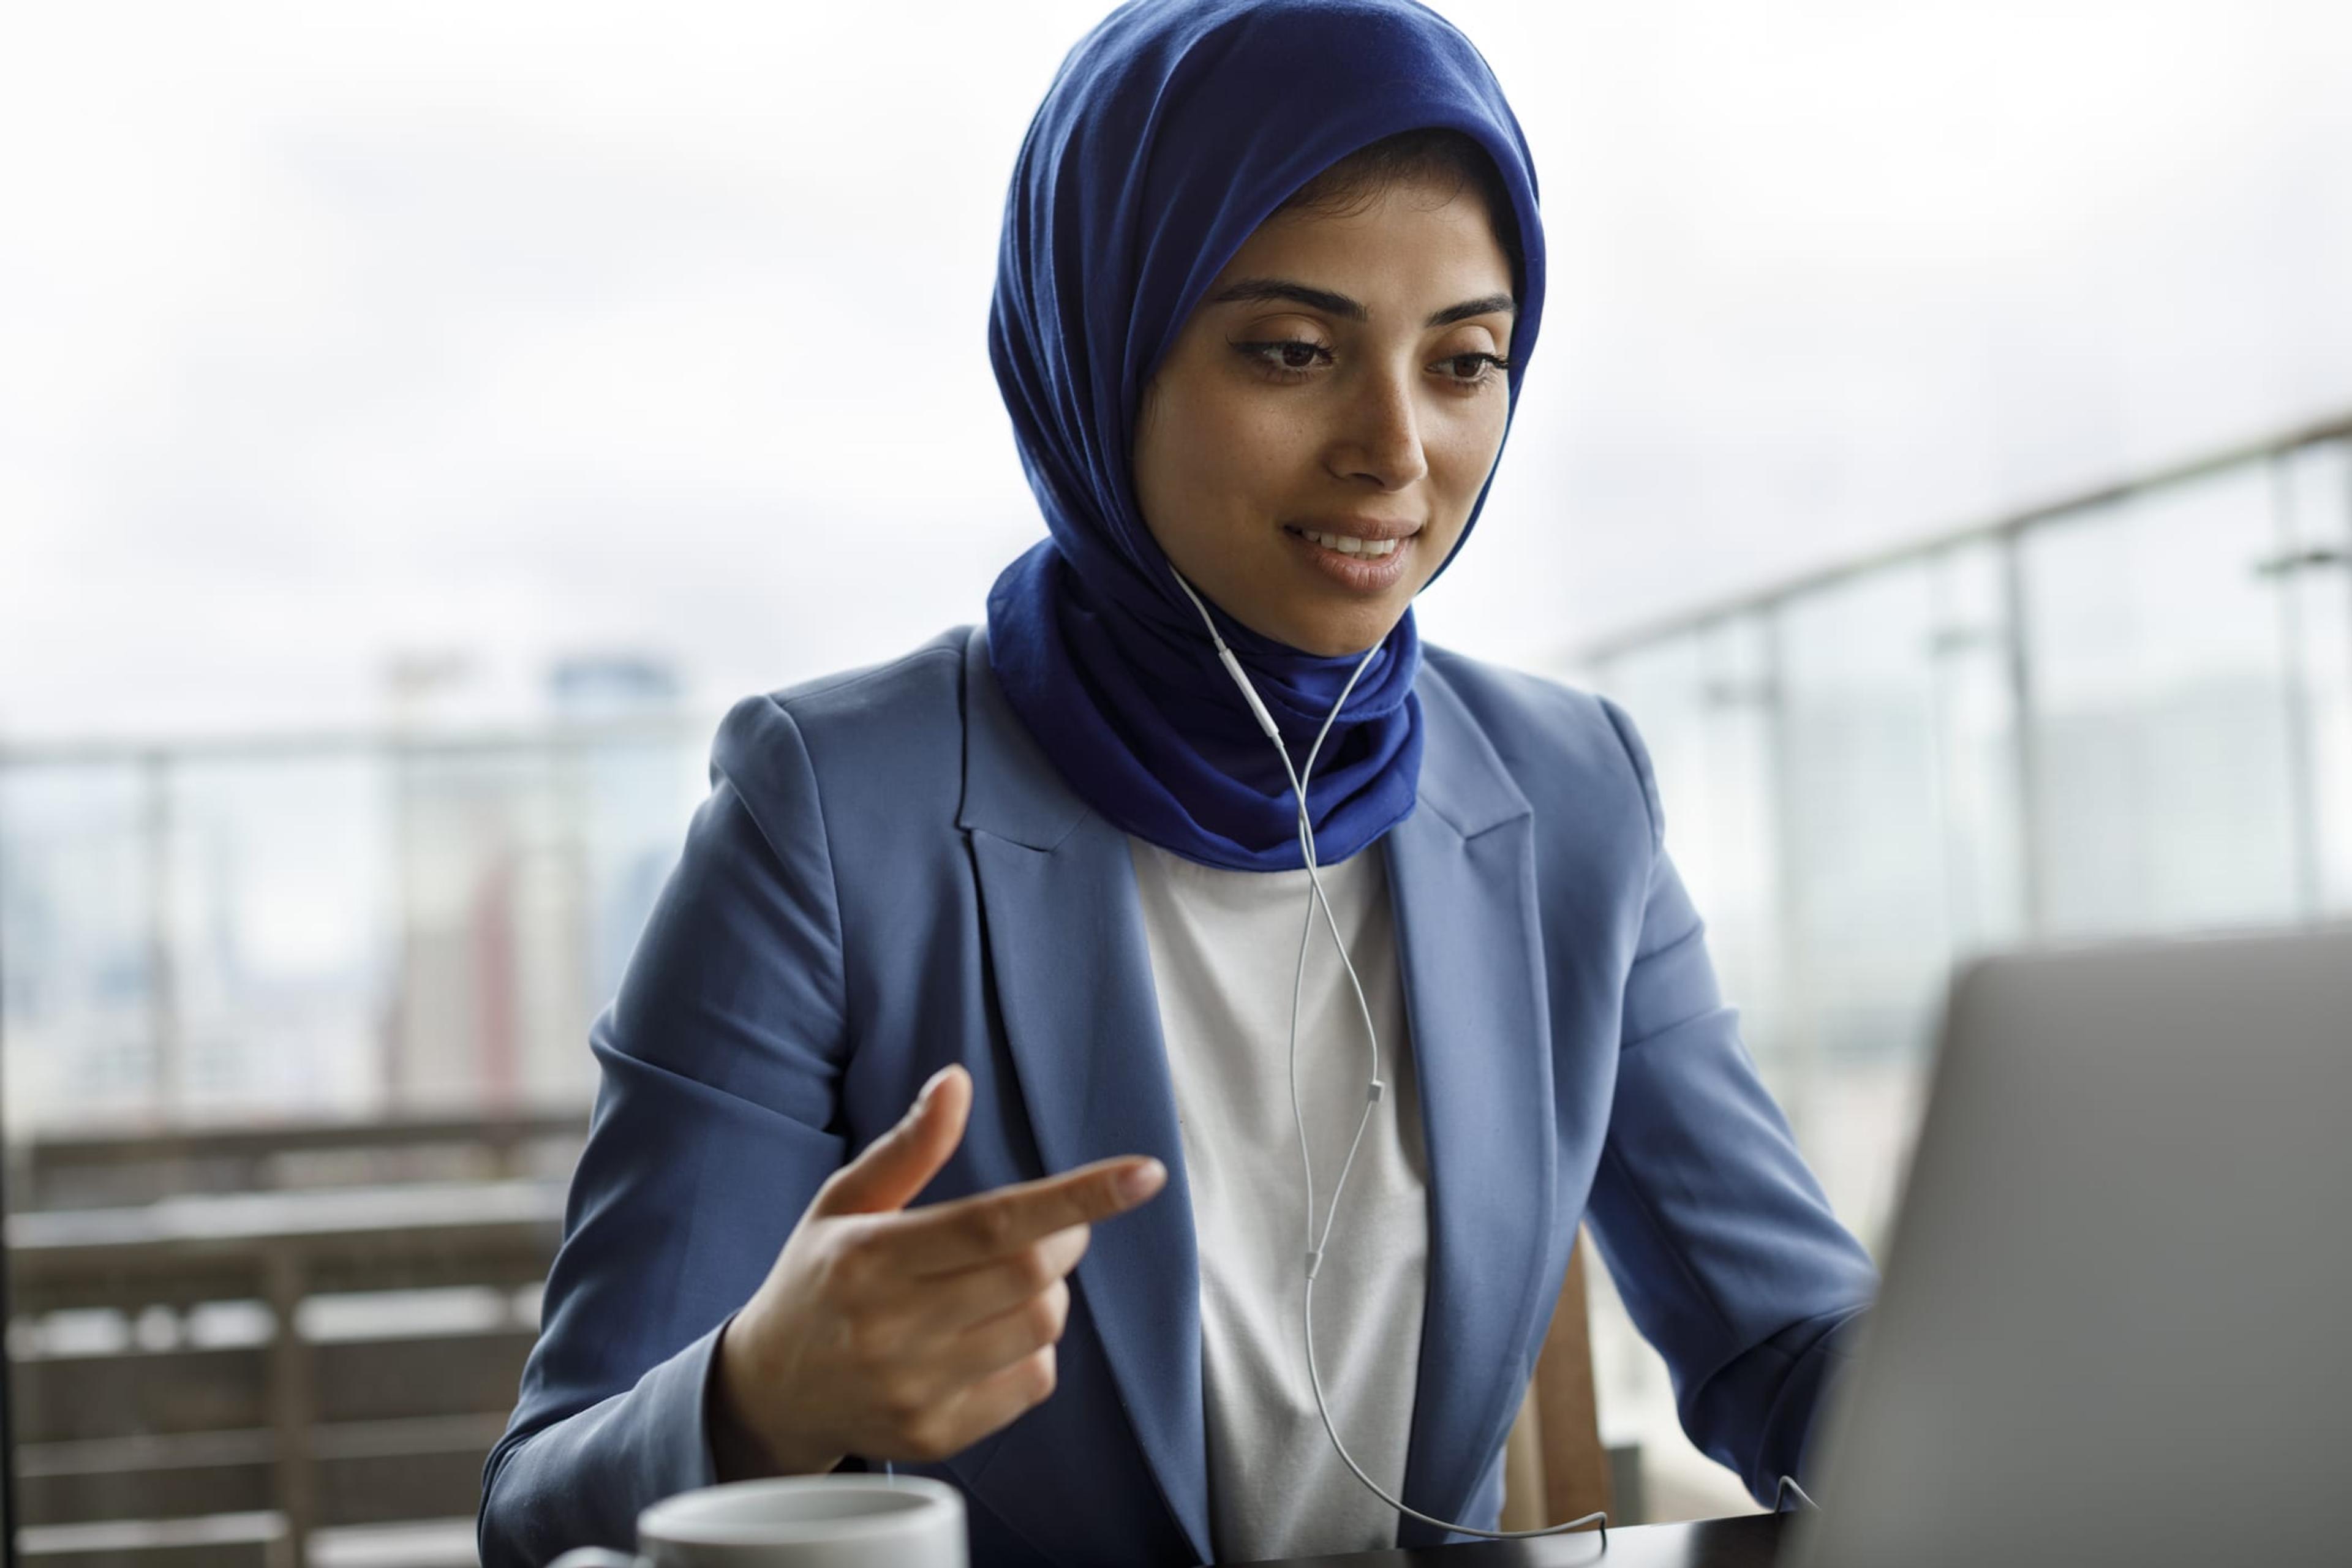 Young woman in blue suit and head covering motions to computer sitting in front of her.